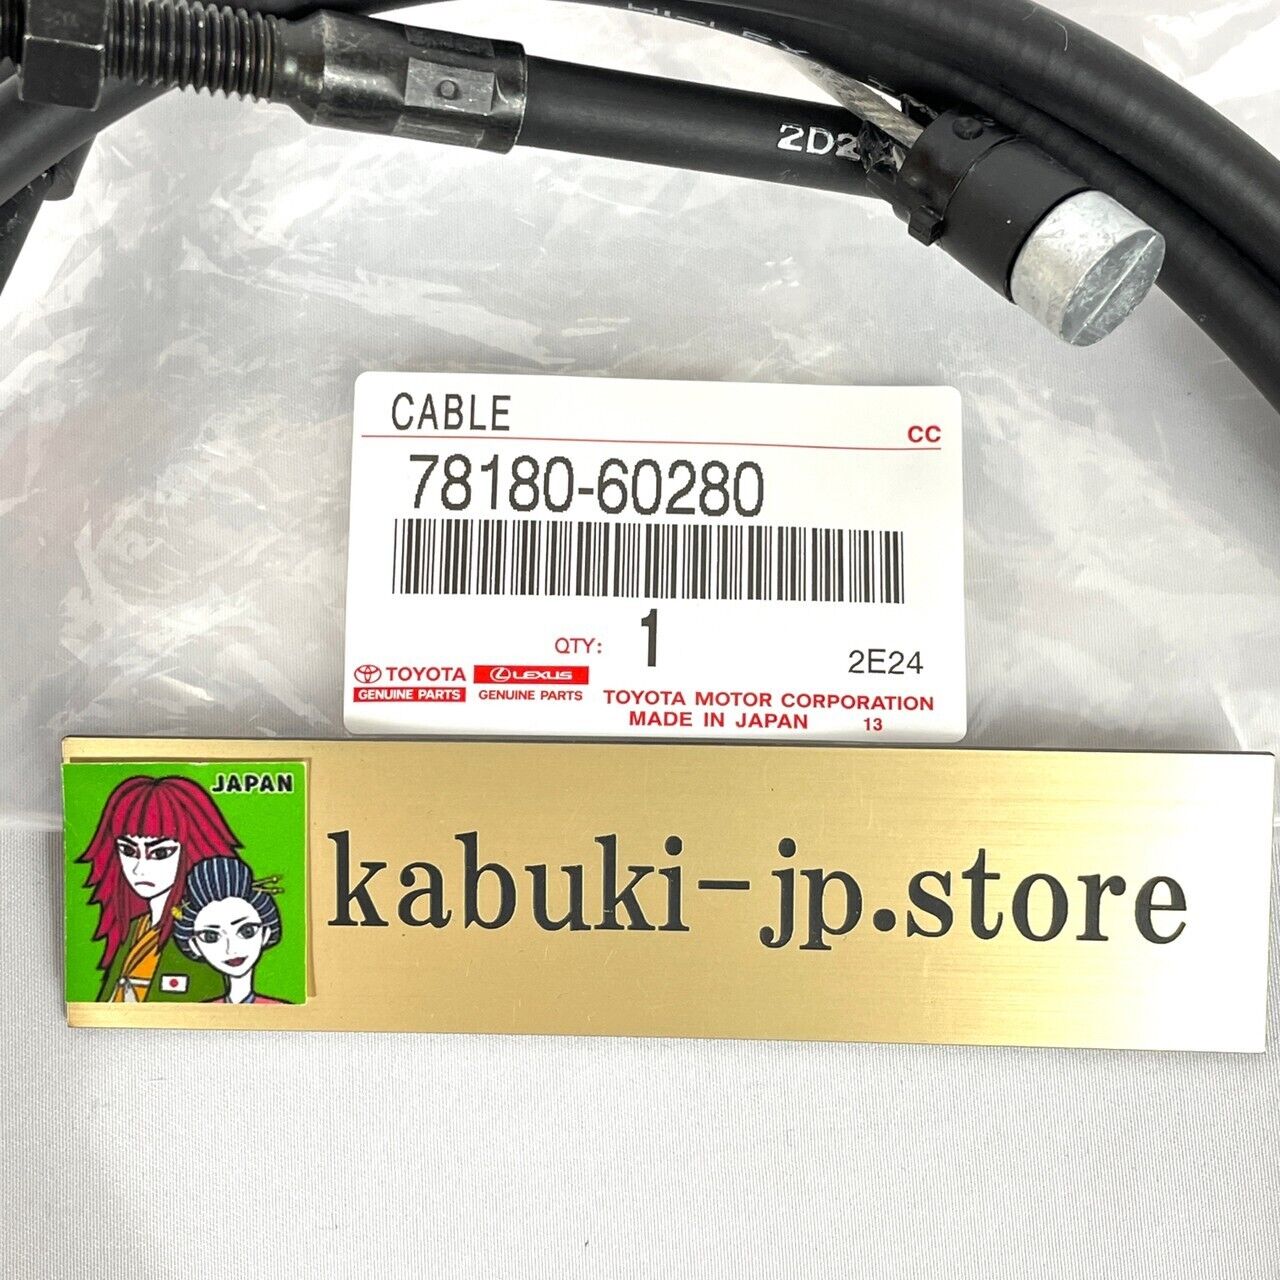 Toyota Genuine 78180-60280 Cable Assy Accessories Control LX450 FZJ80 OEM Japan